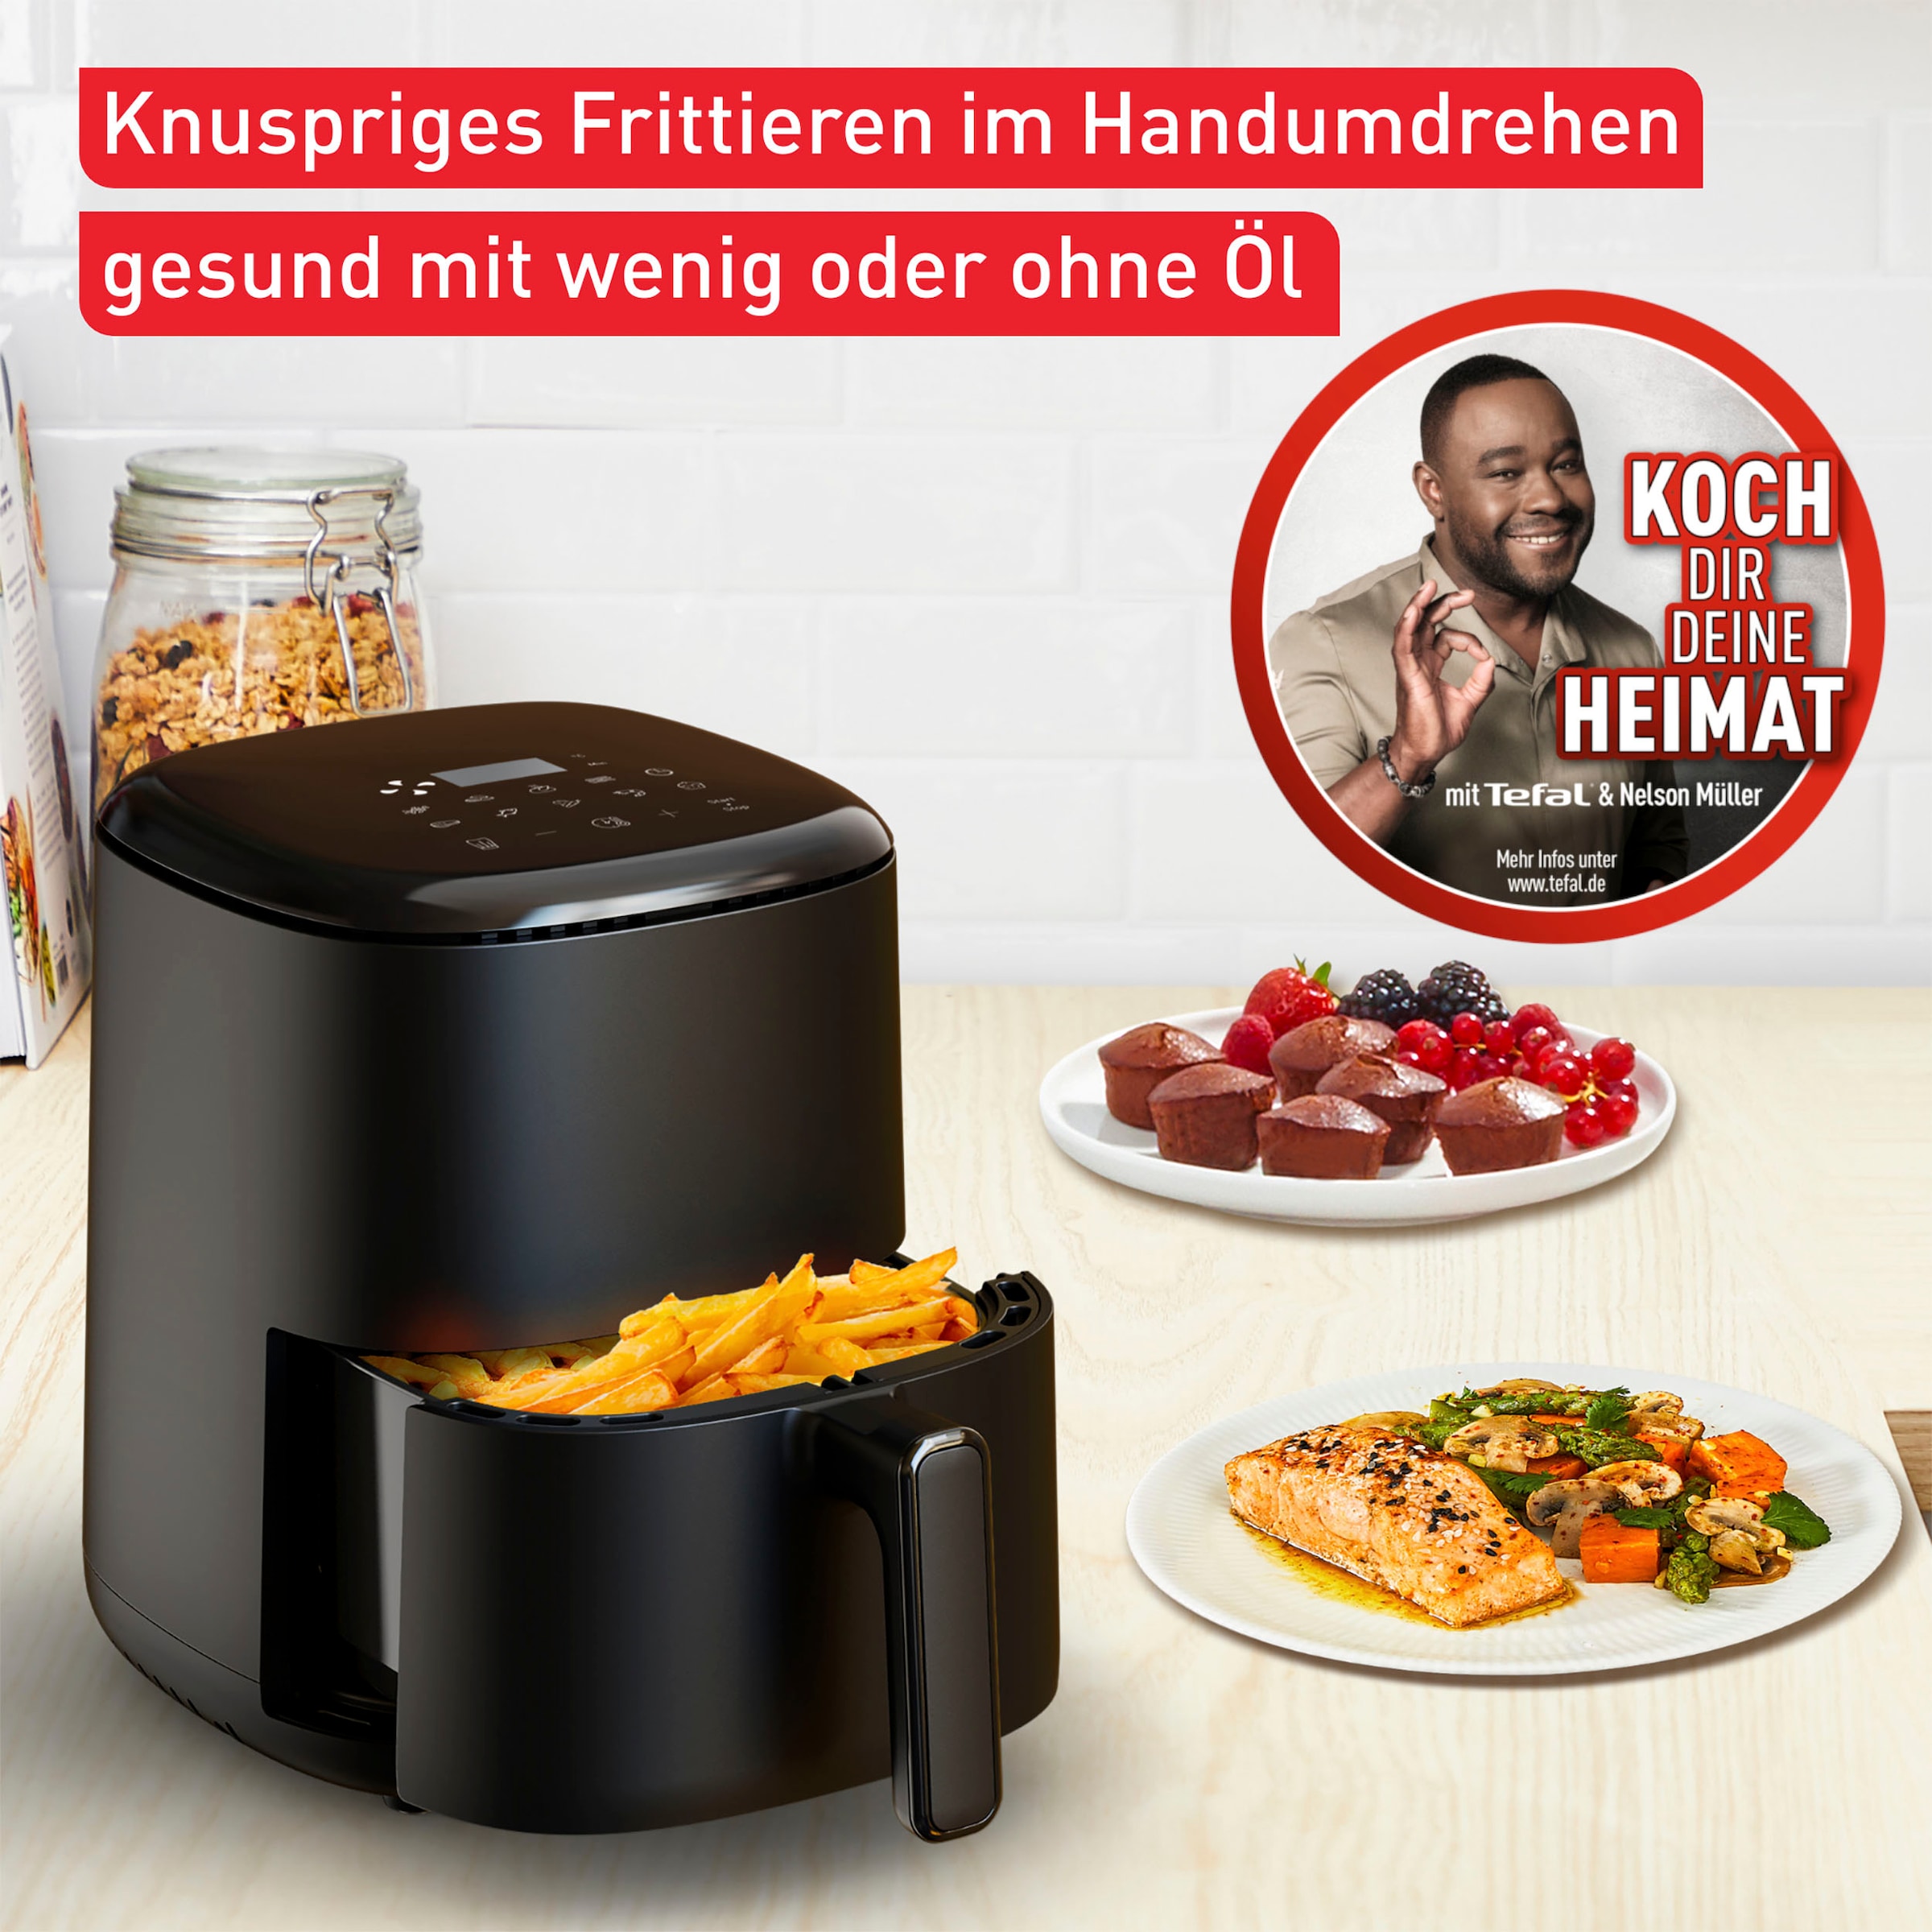 Tefal Heißluftfritteuse »EY1458 Easy Shop OTTO W Compact«, Online Fry im 1300